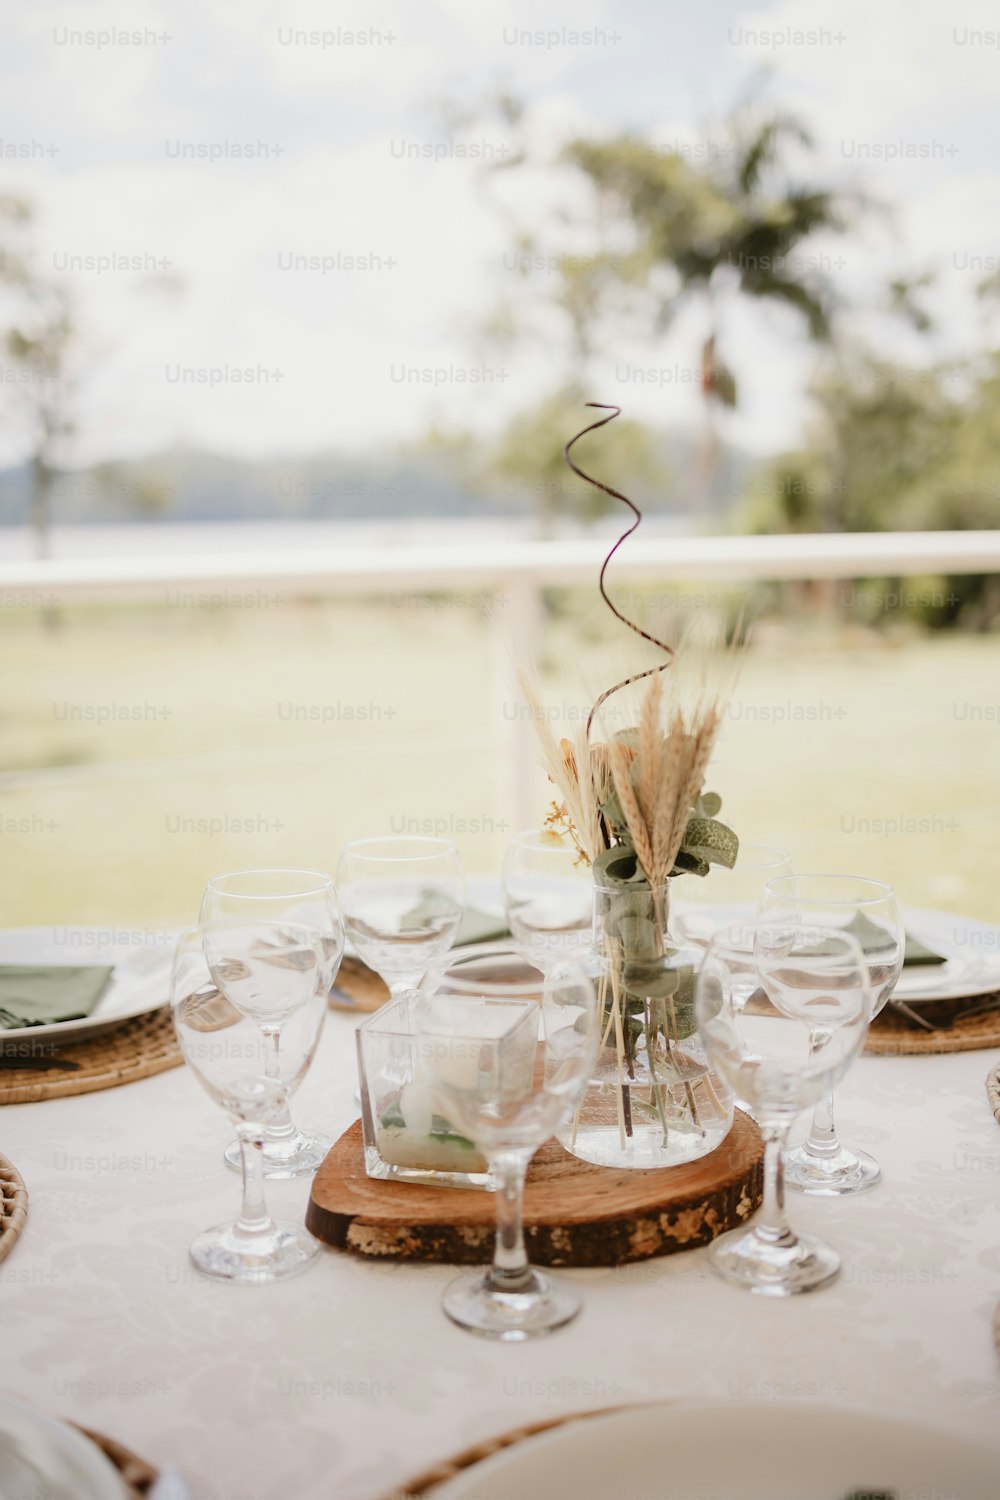 a table is set with wine glasses and plates